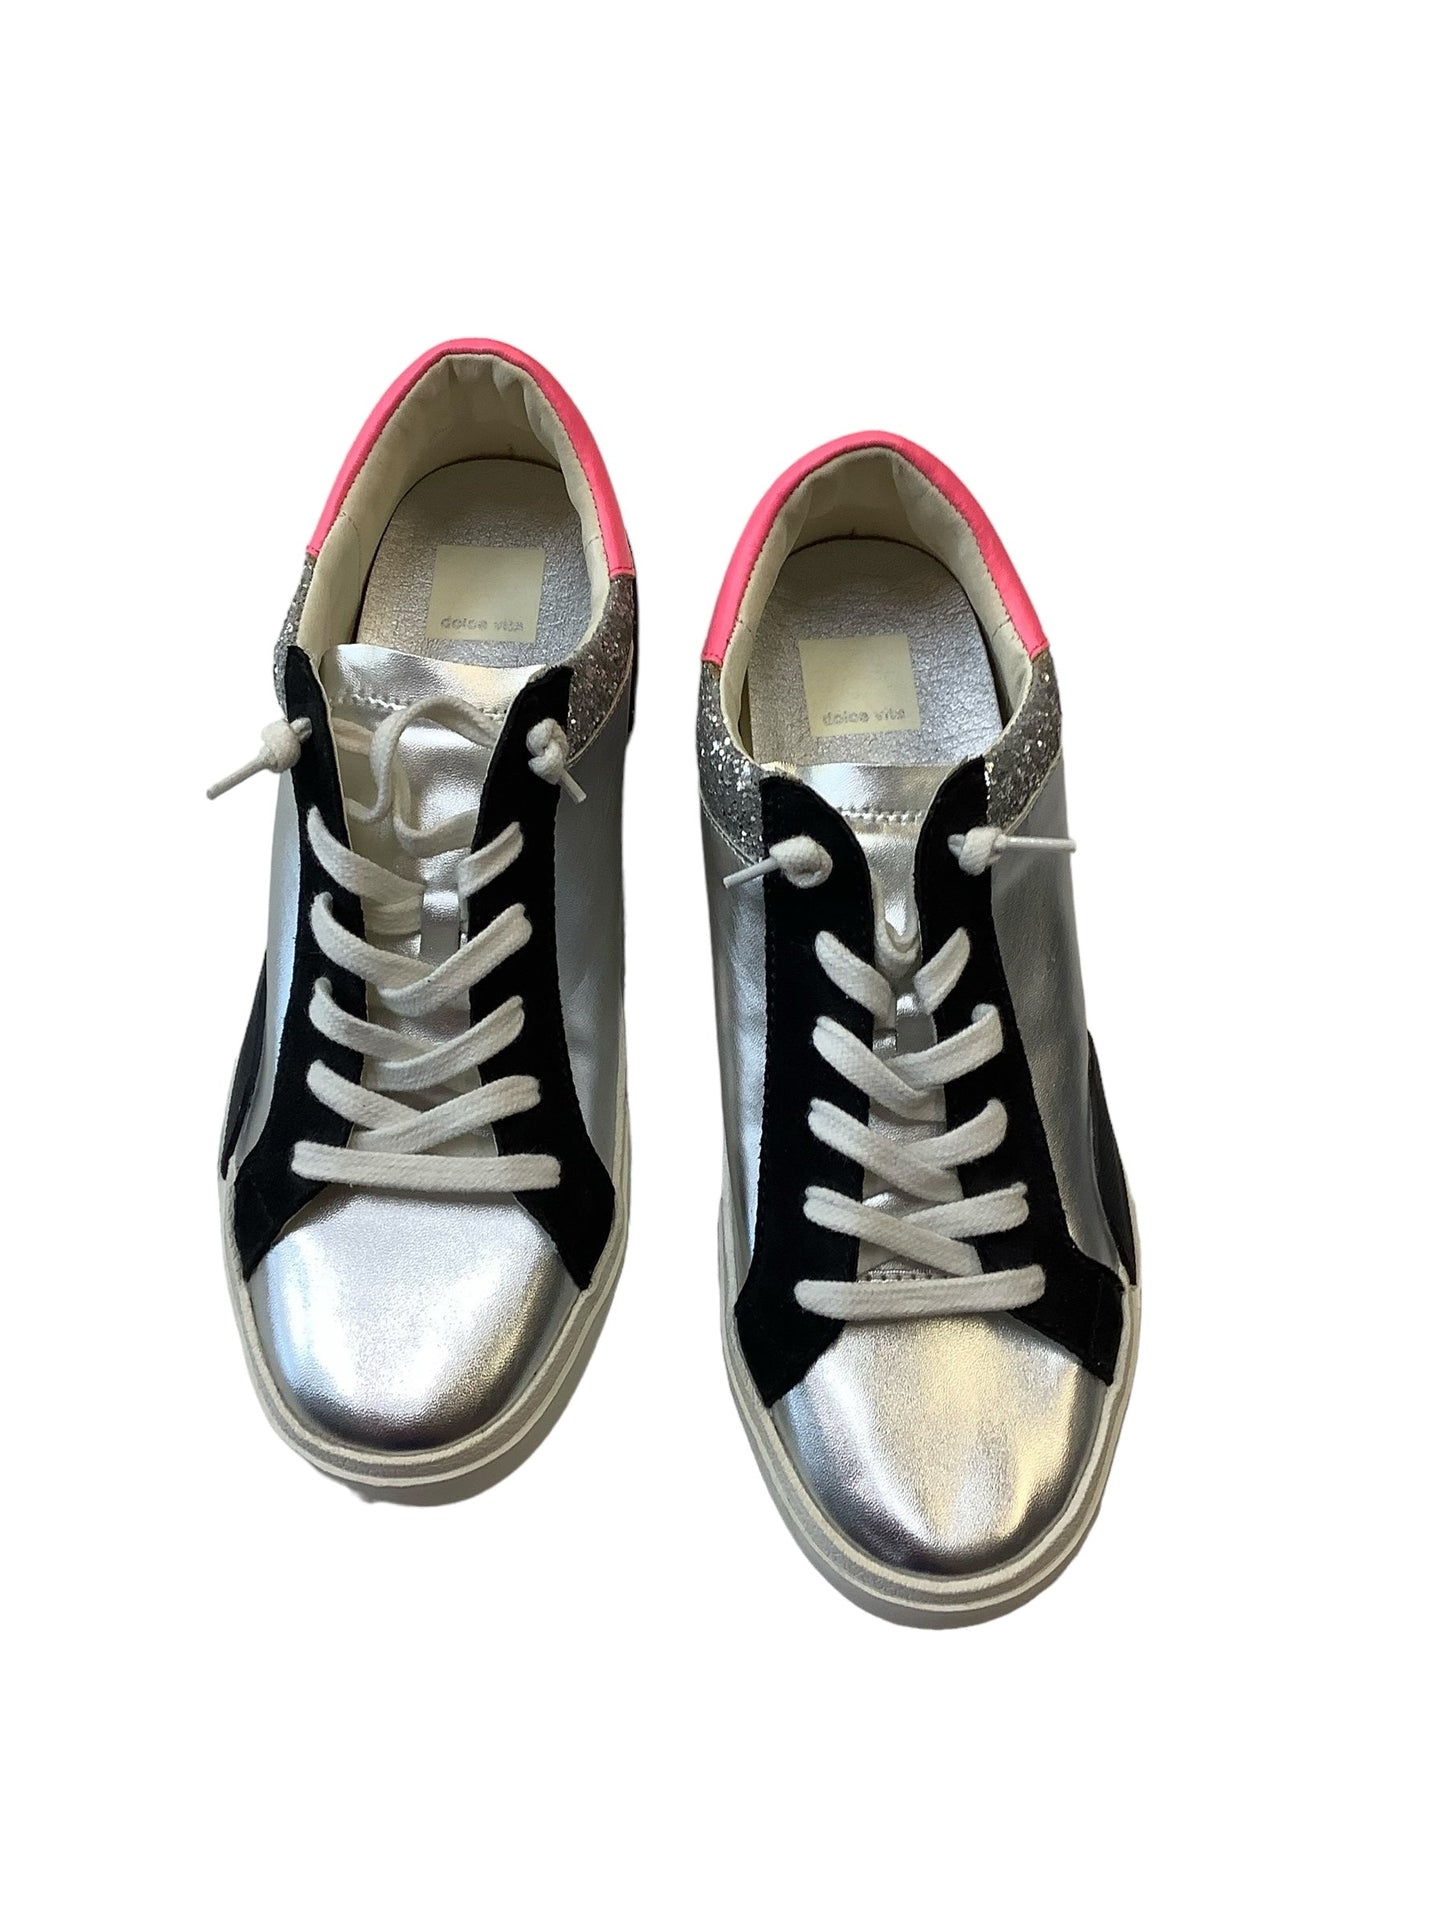 Silver Shoes Sneakers Dolce Vita, Size 8